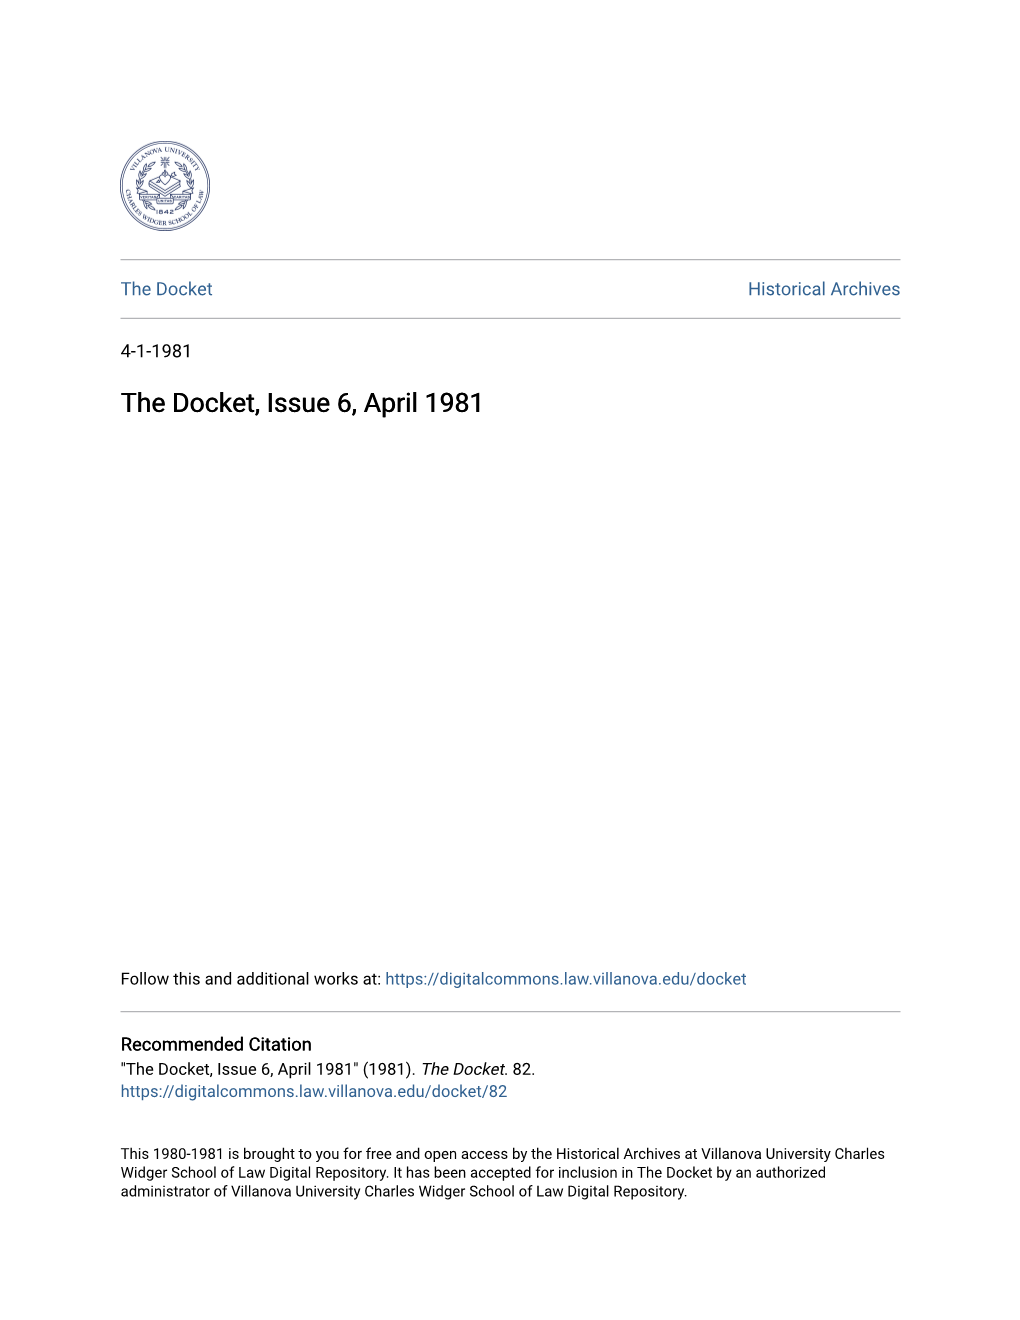 The Docket, Issue 6, April 1981